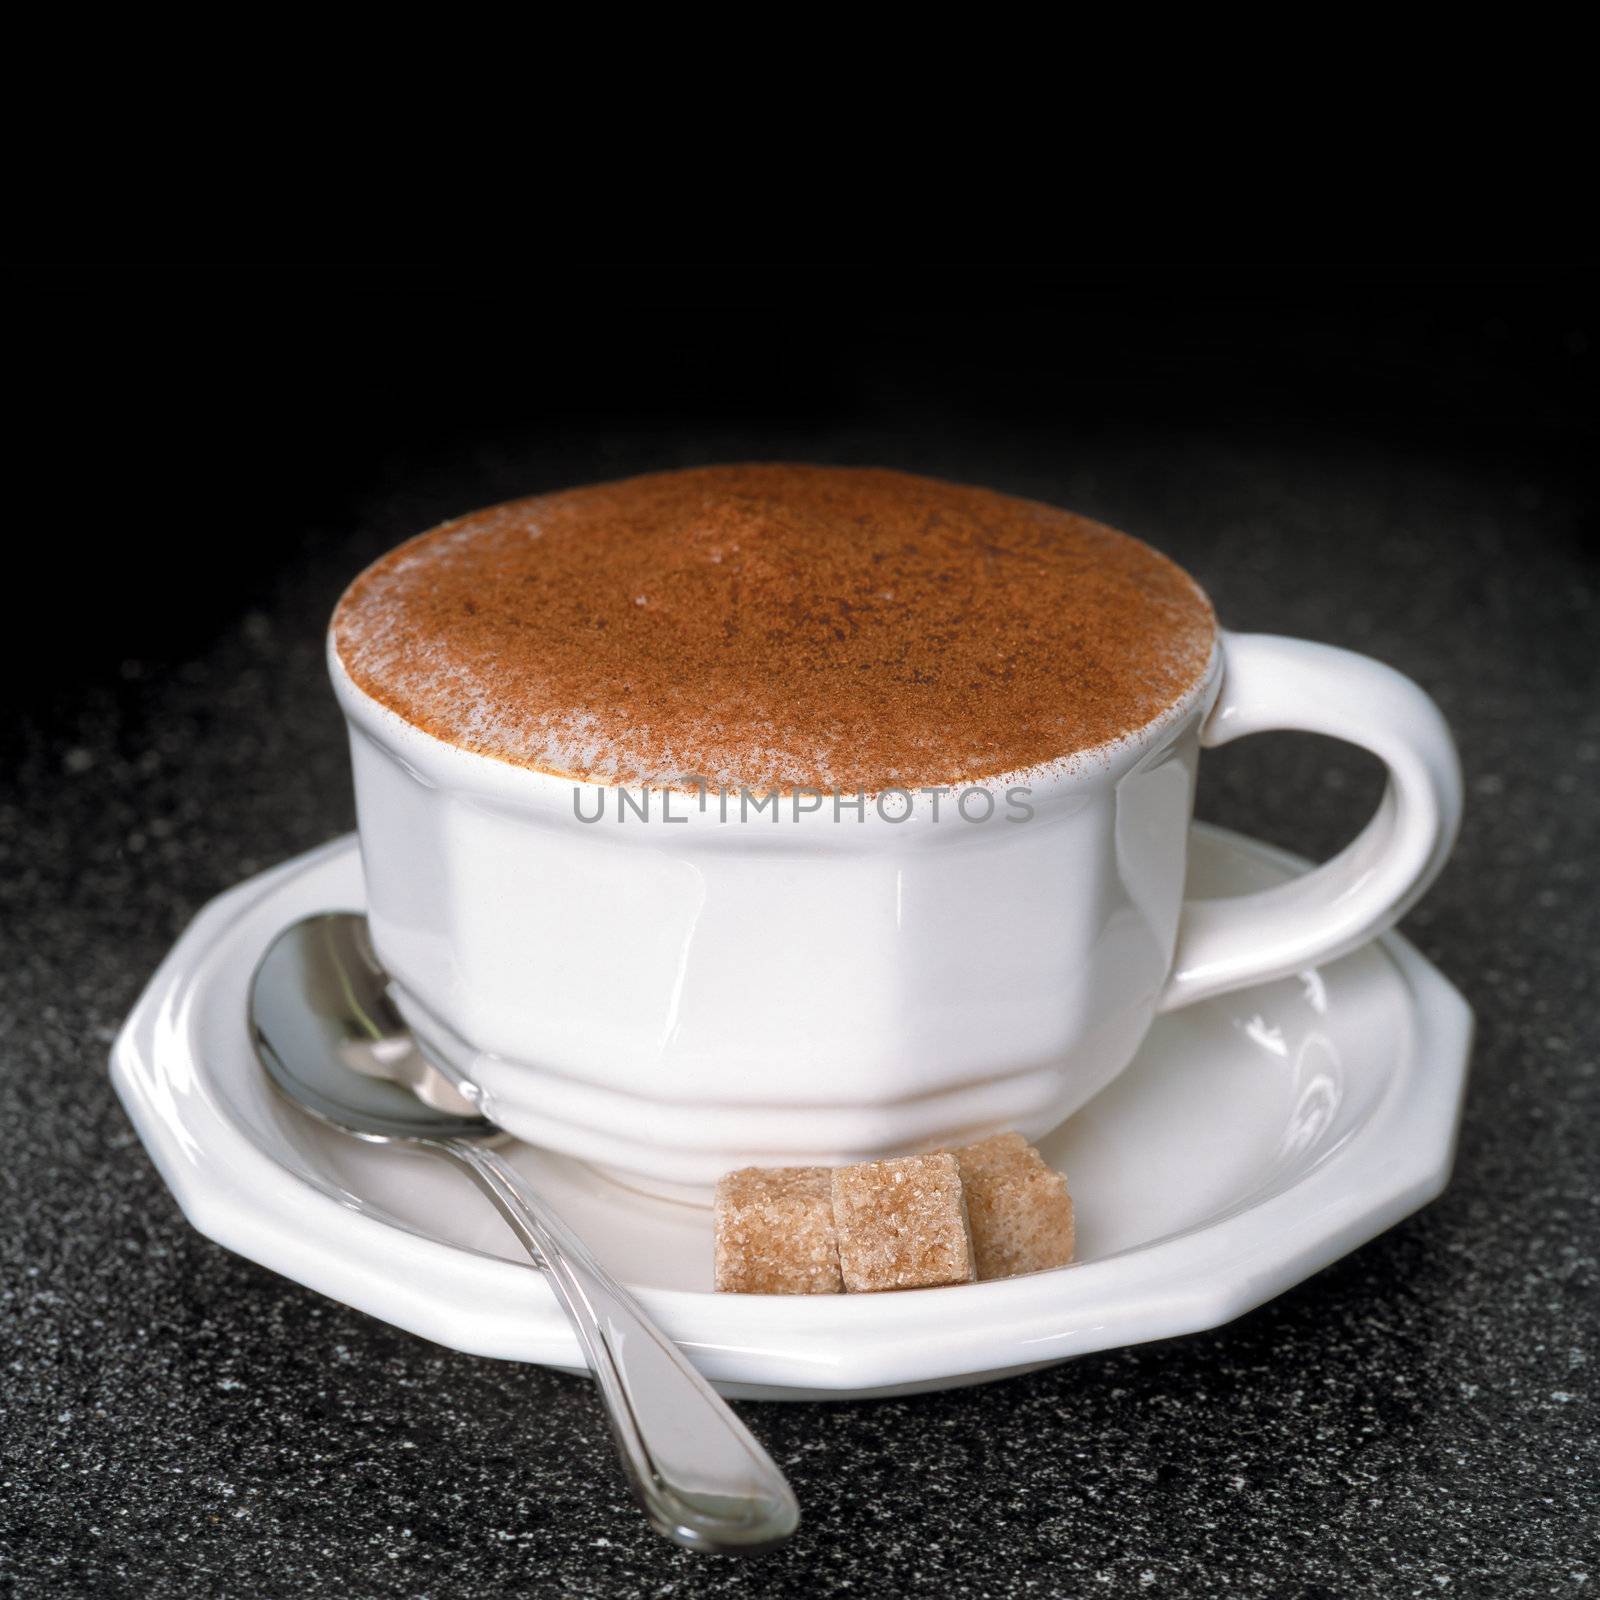 Hot cappuccino with spoon and sugar cubes on a dark wood table.
